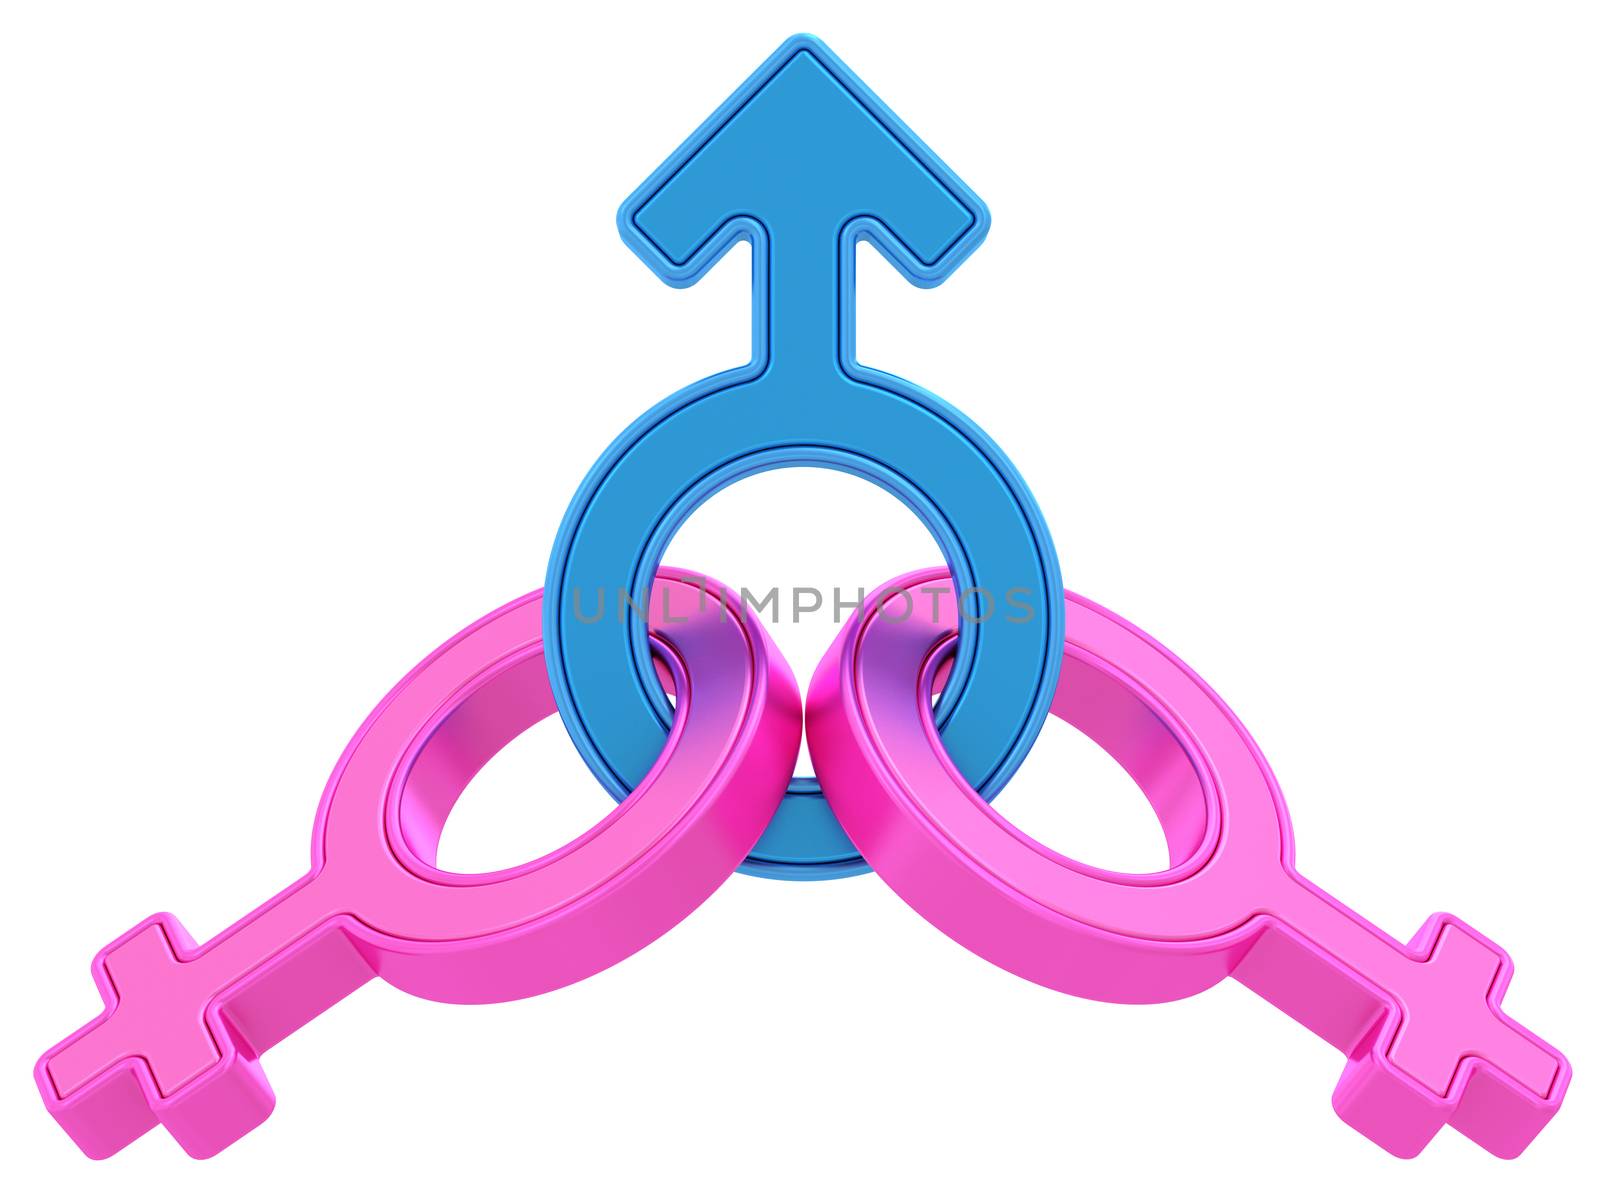 Male and two female gender symbols chained together on white by oneo